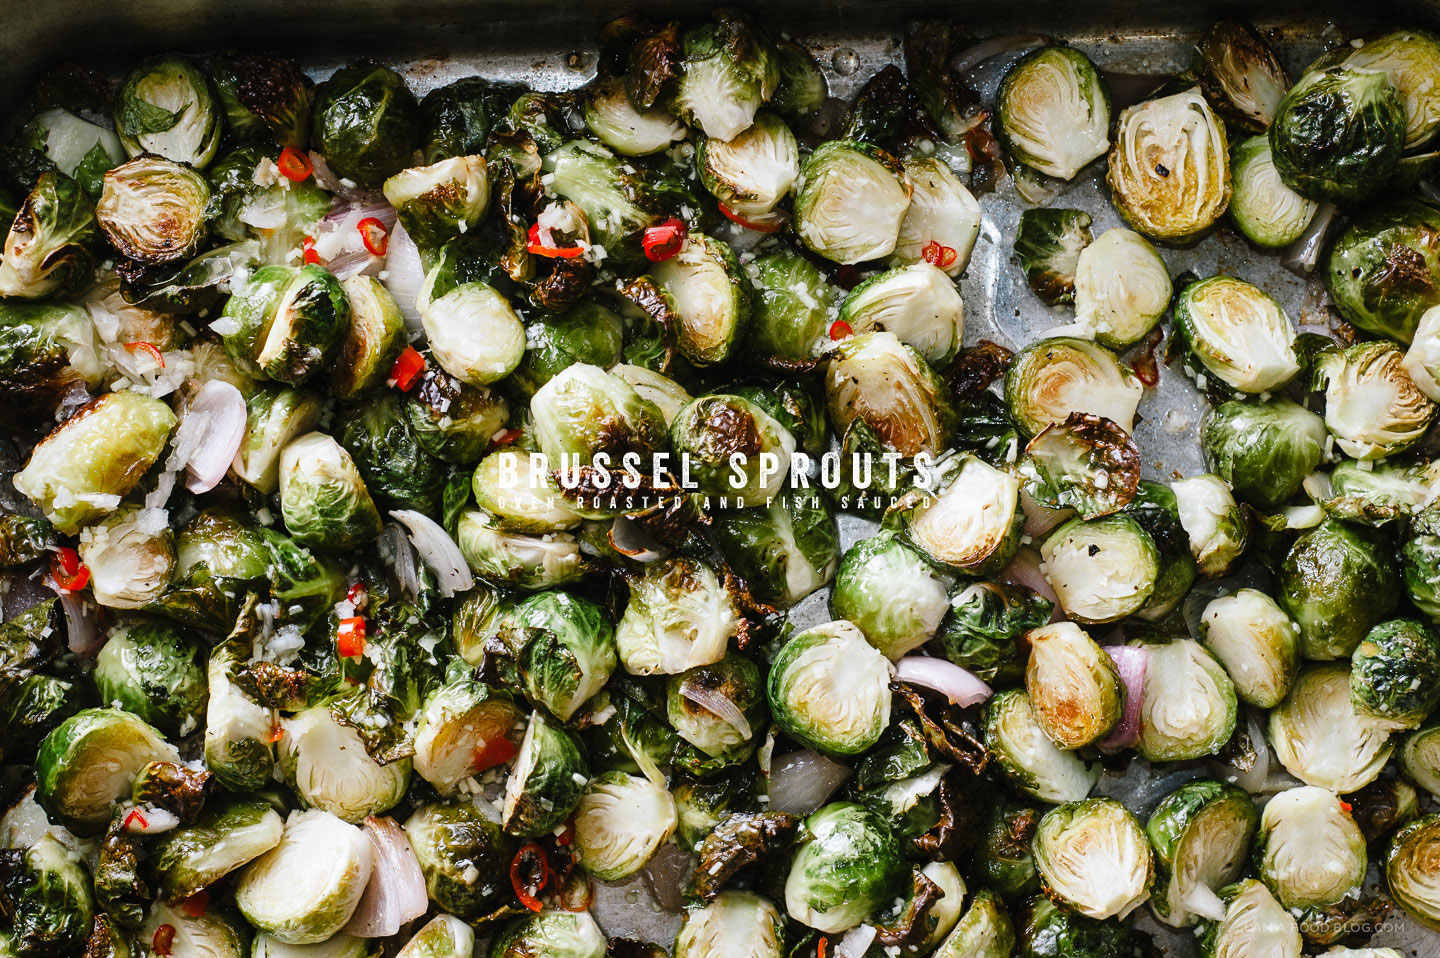 oven roasted brussel sprouts with fish sauce recipe - sharefavoritefood.com